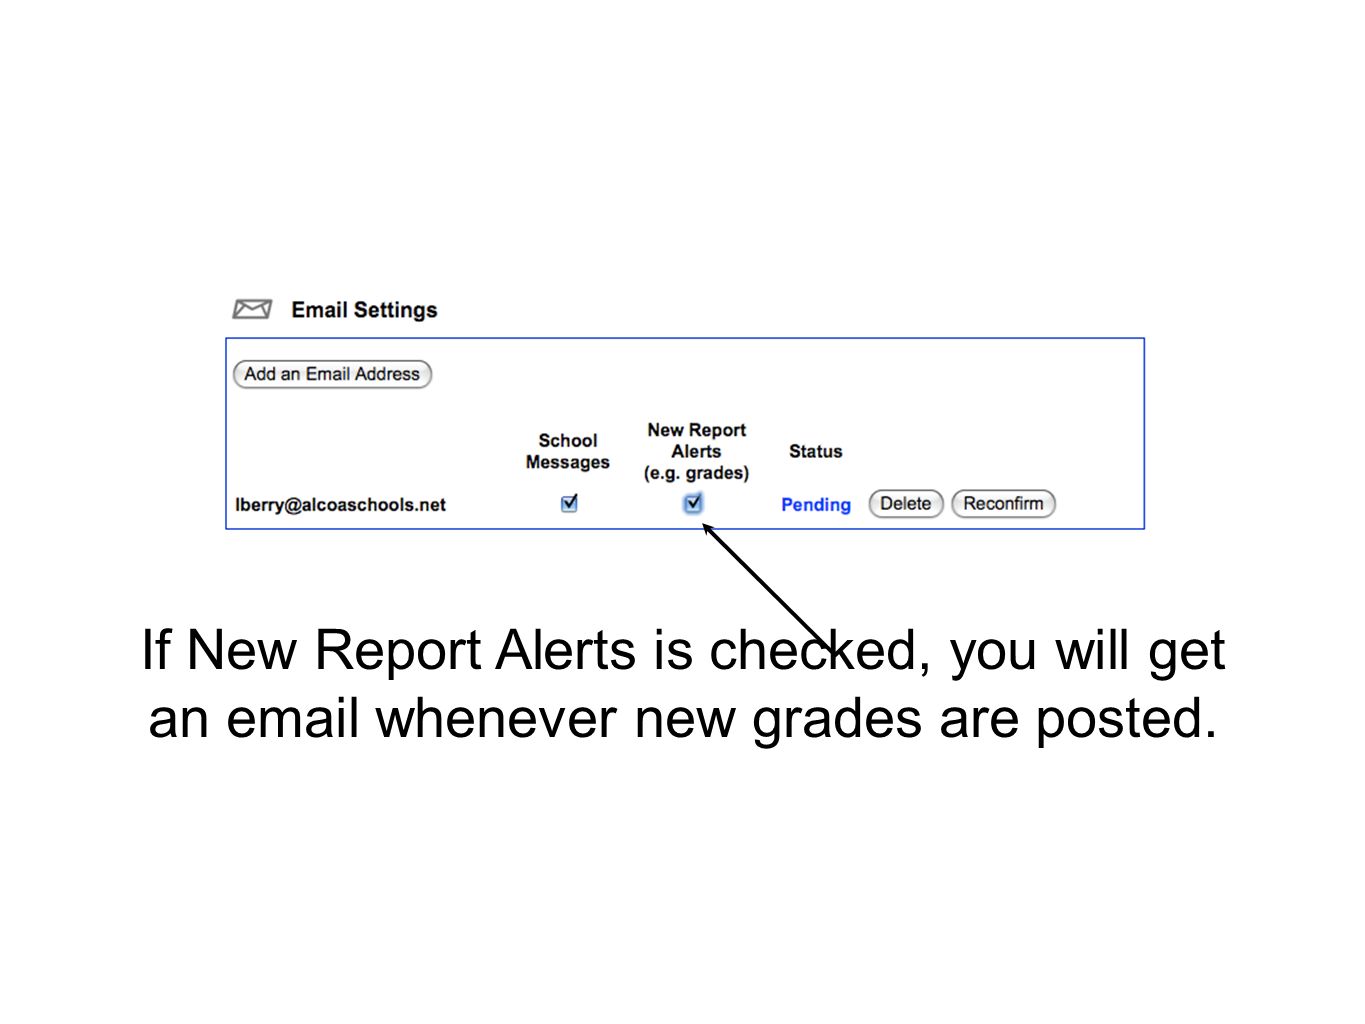 If New Report Alerts is checked, you will get an  whenever new grades are posted.